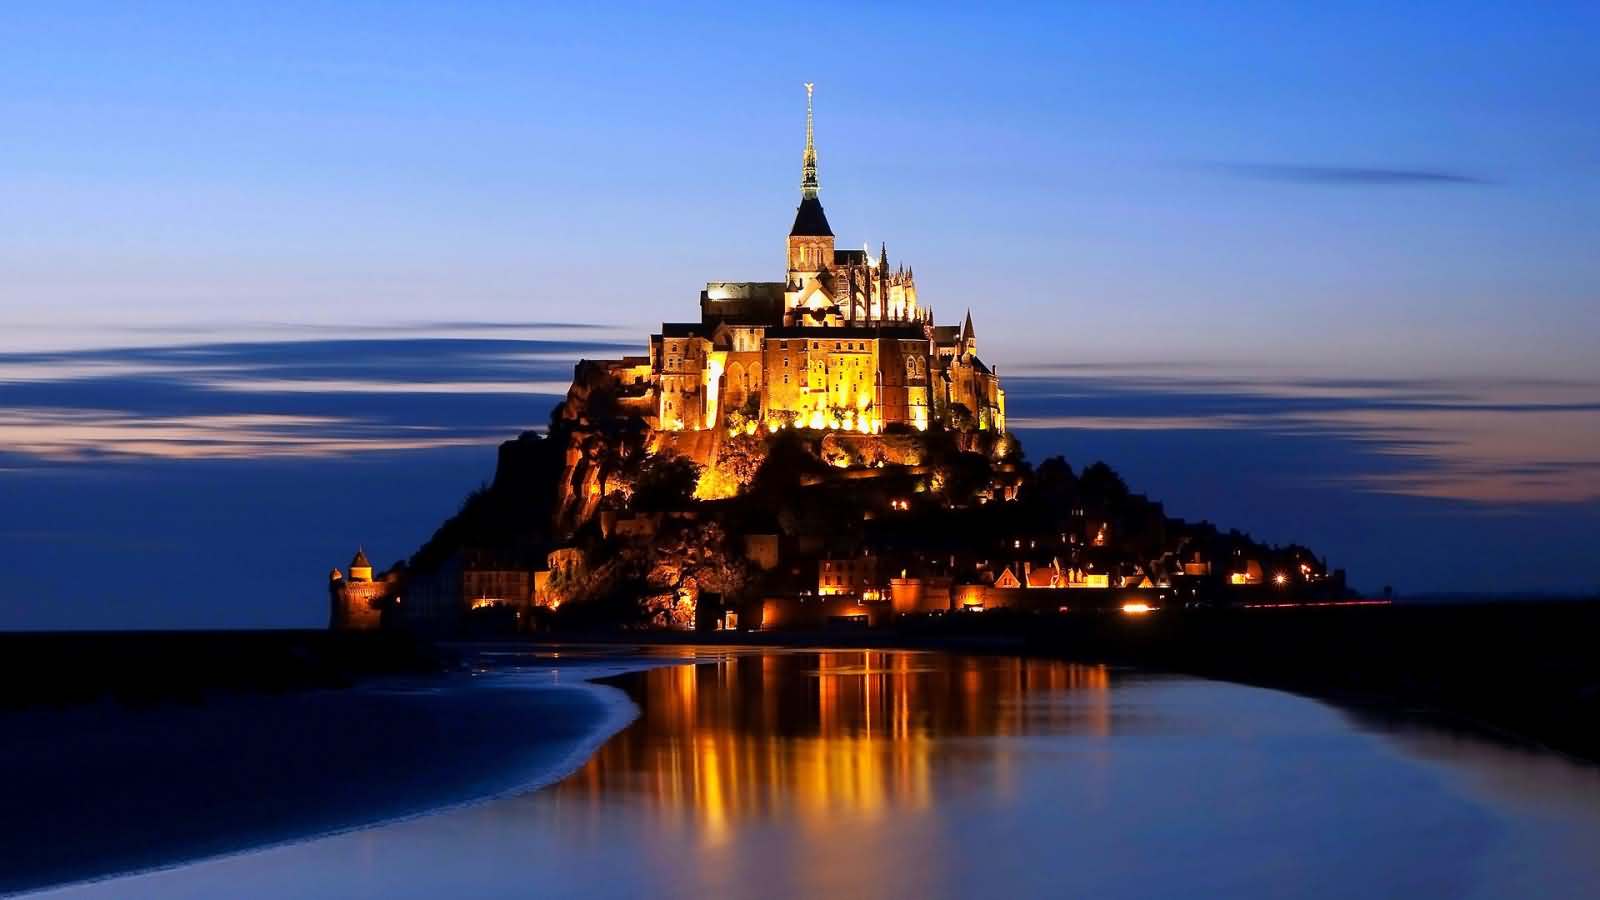 The Mont Saint-Michel lit up with night lights